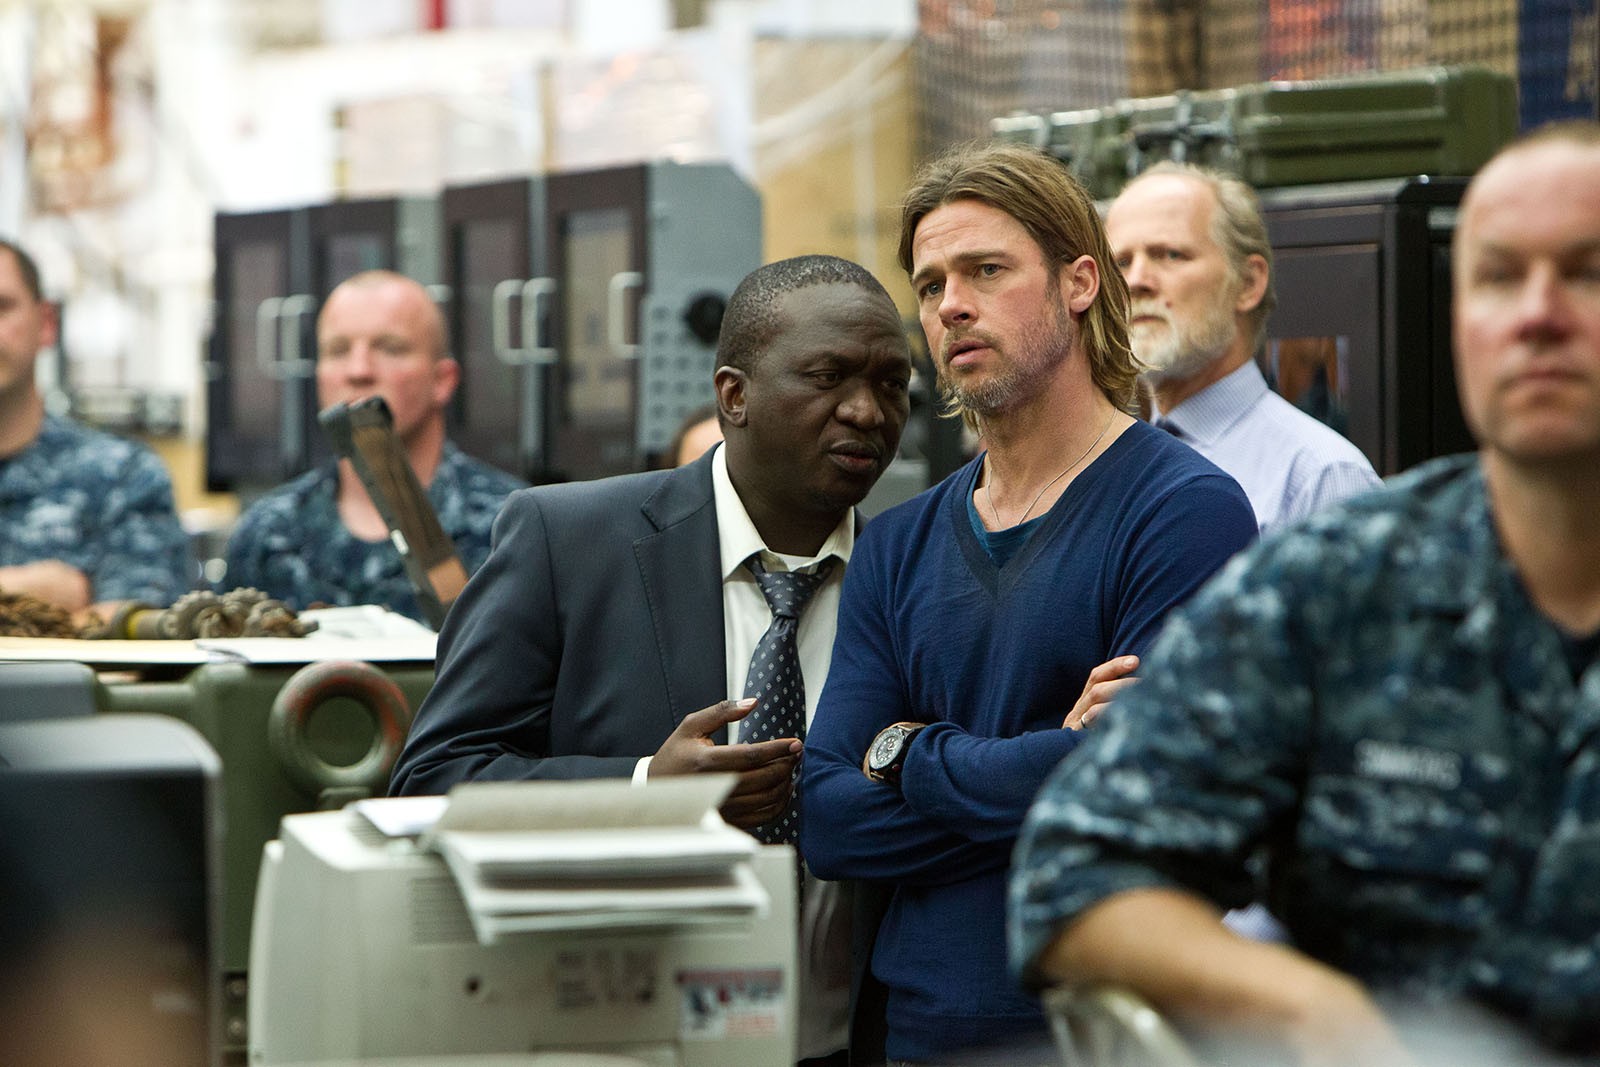 Fana Mokoena stars as Thierry and Brad Pitt stars as Gerry Lane in Paramount Pictures' World War Z (2013)